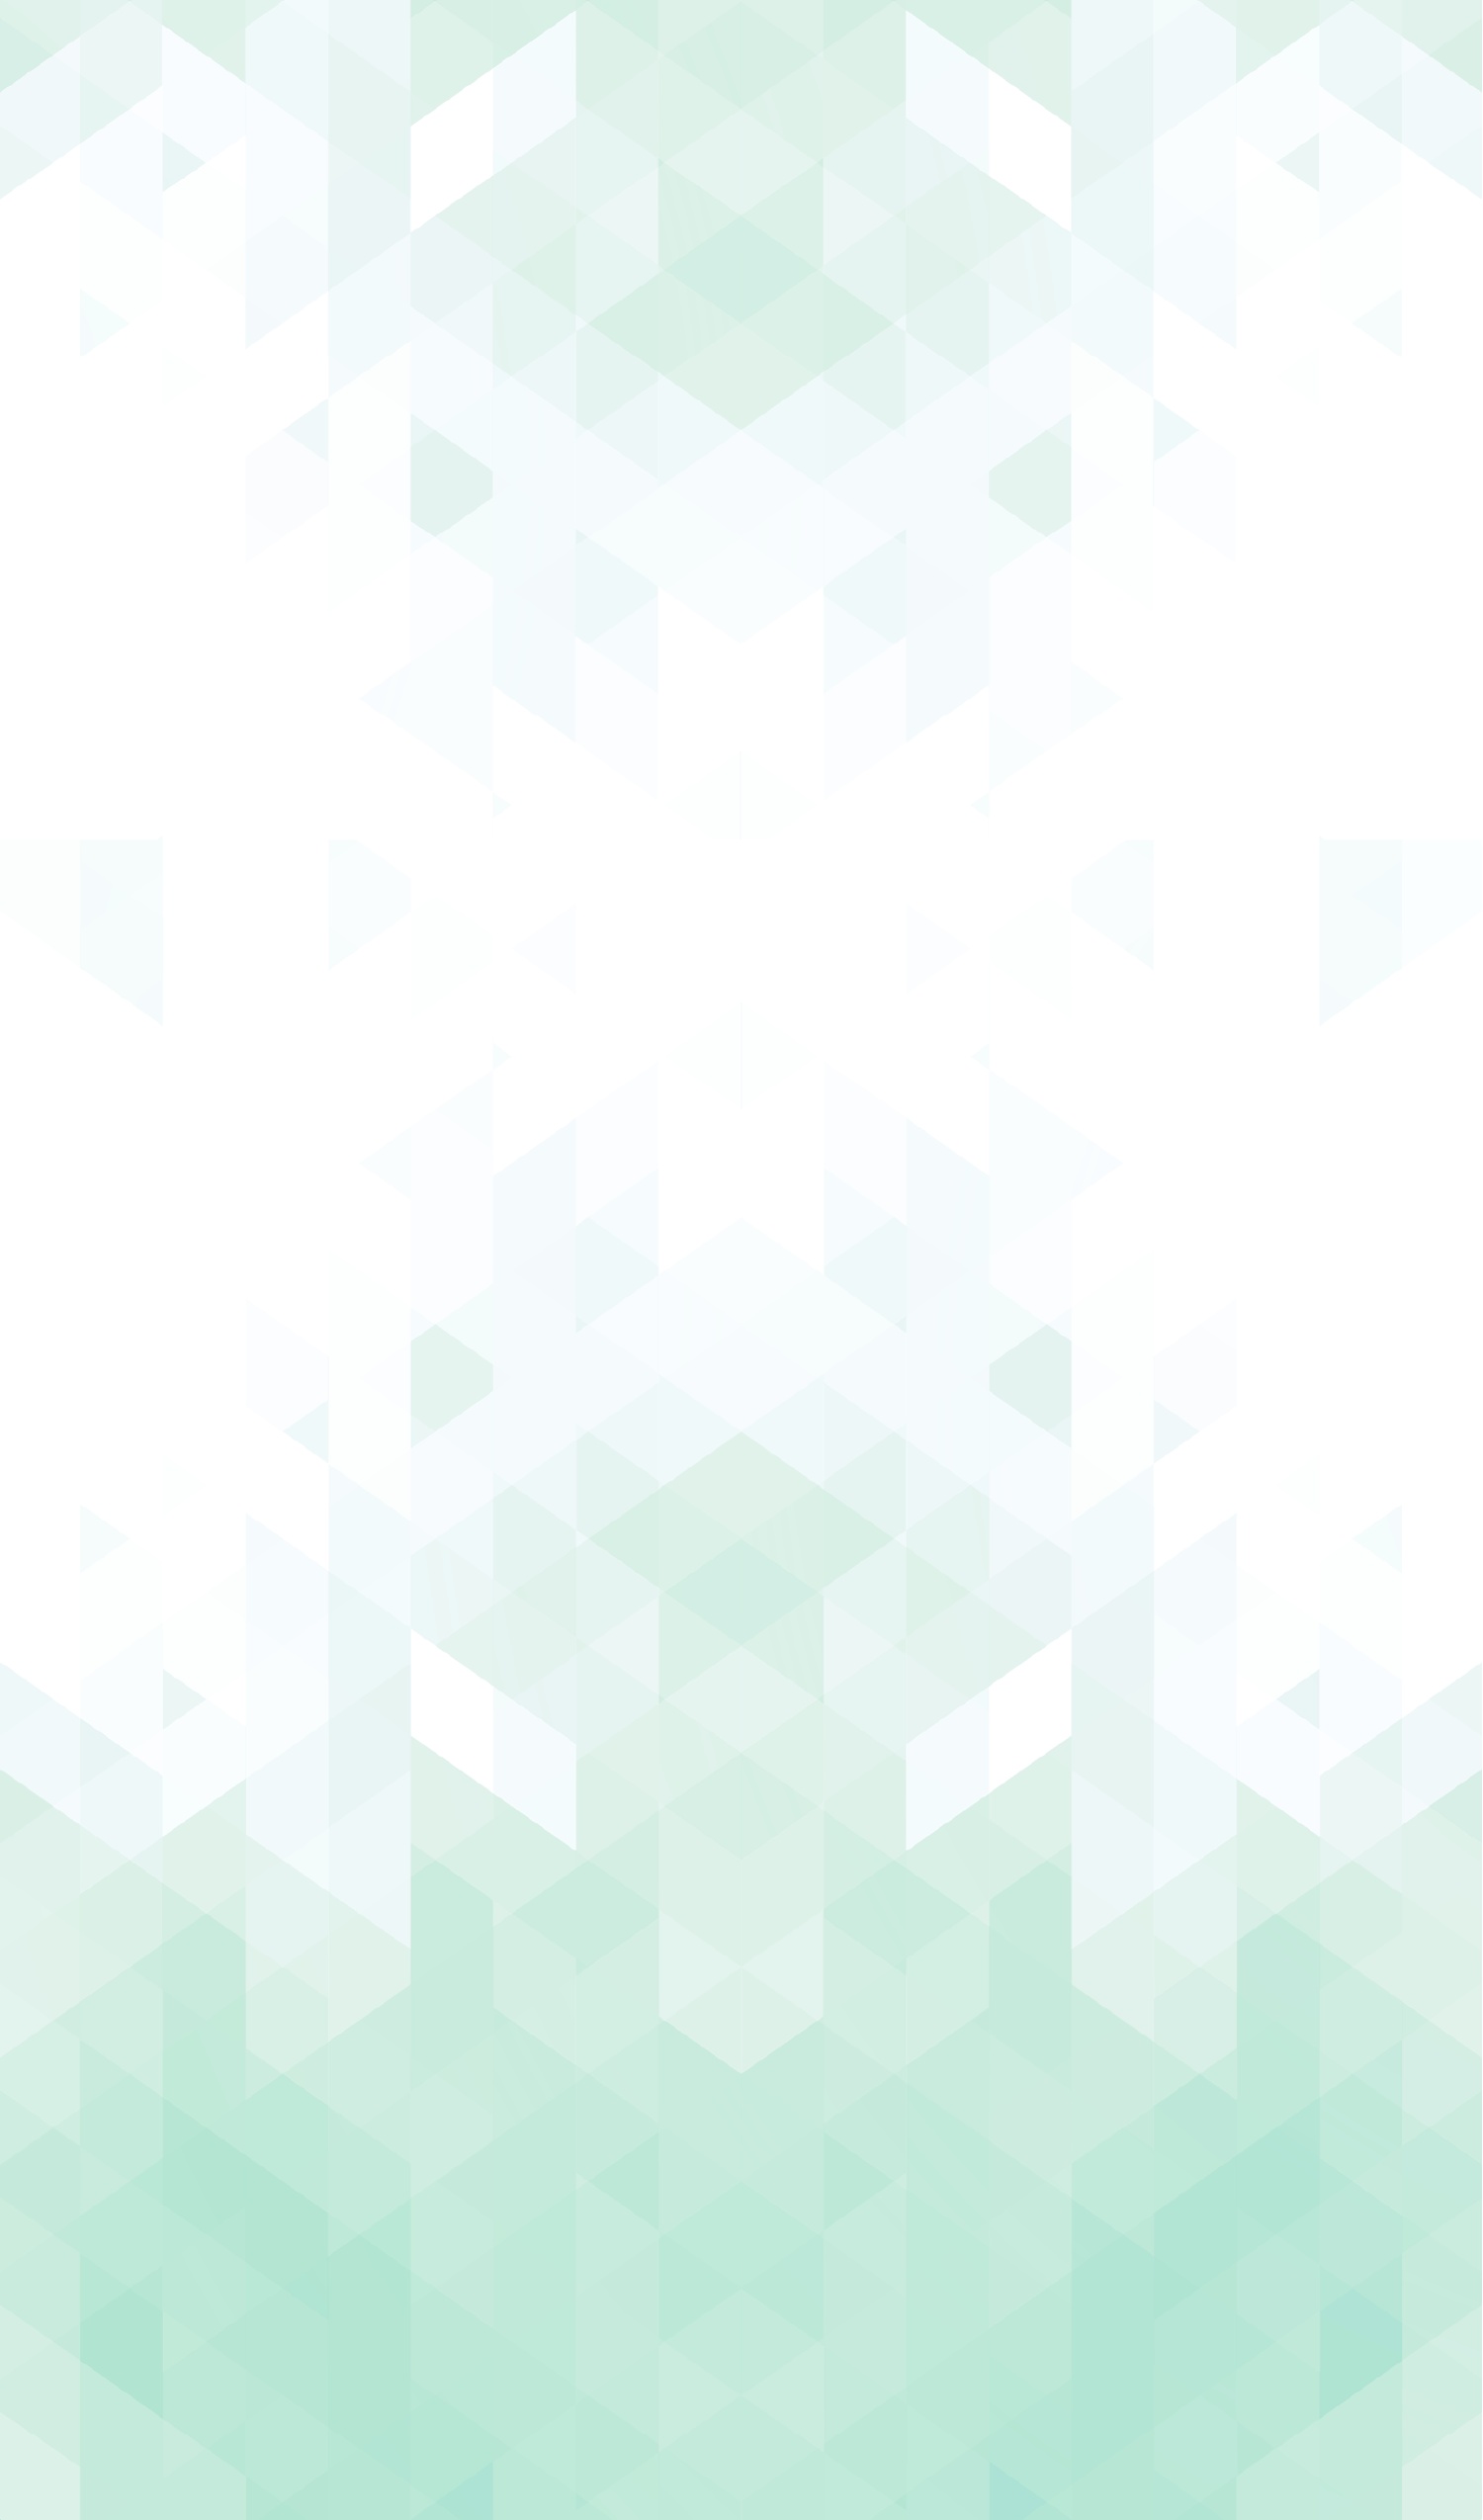 Vertical abstract white background with green gradient shapes